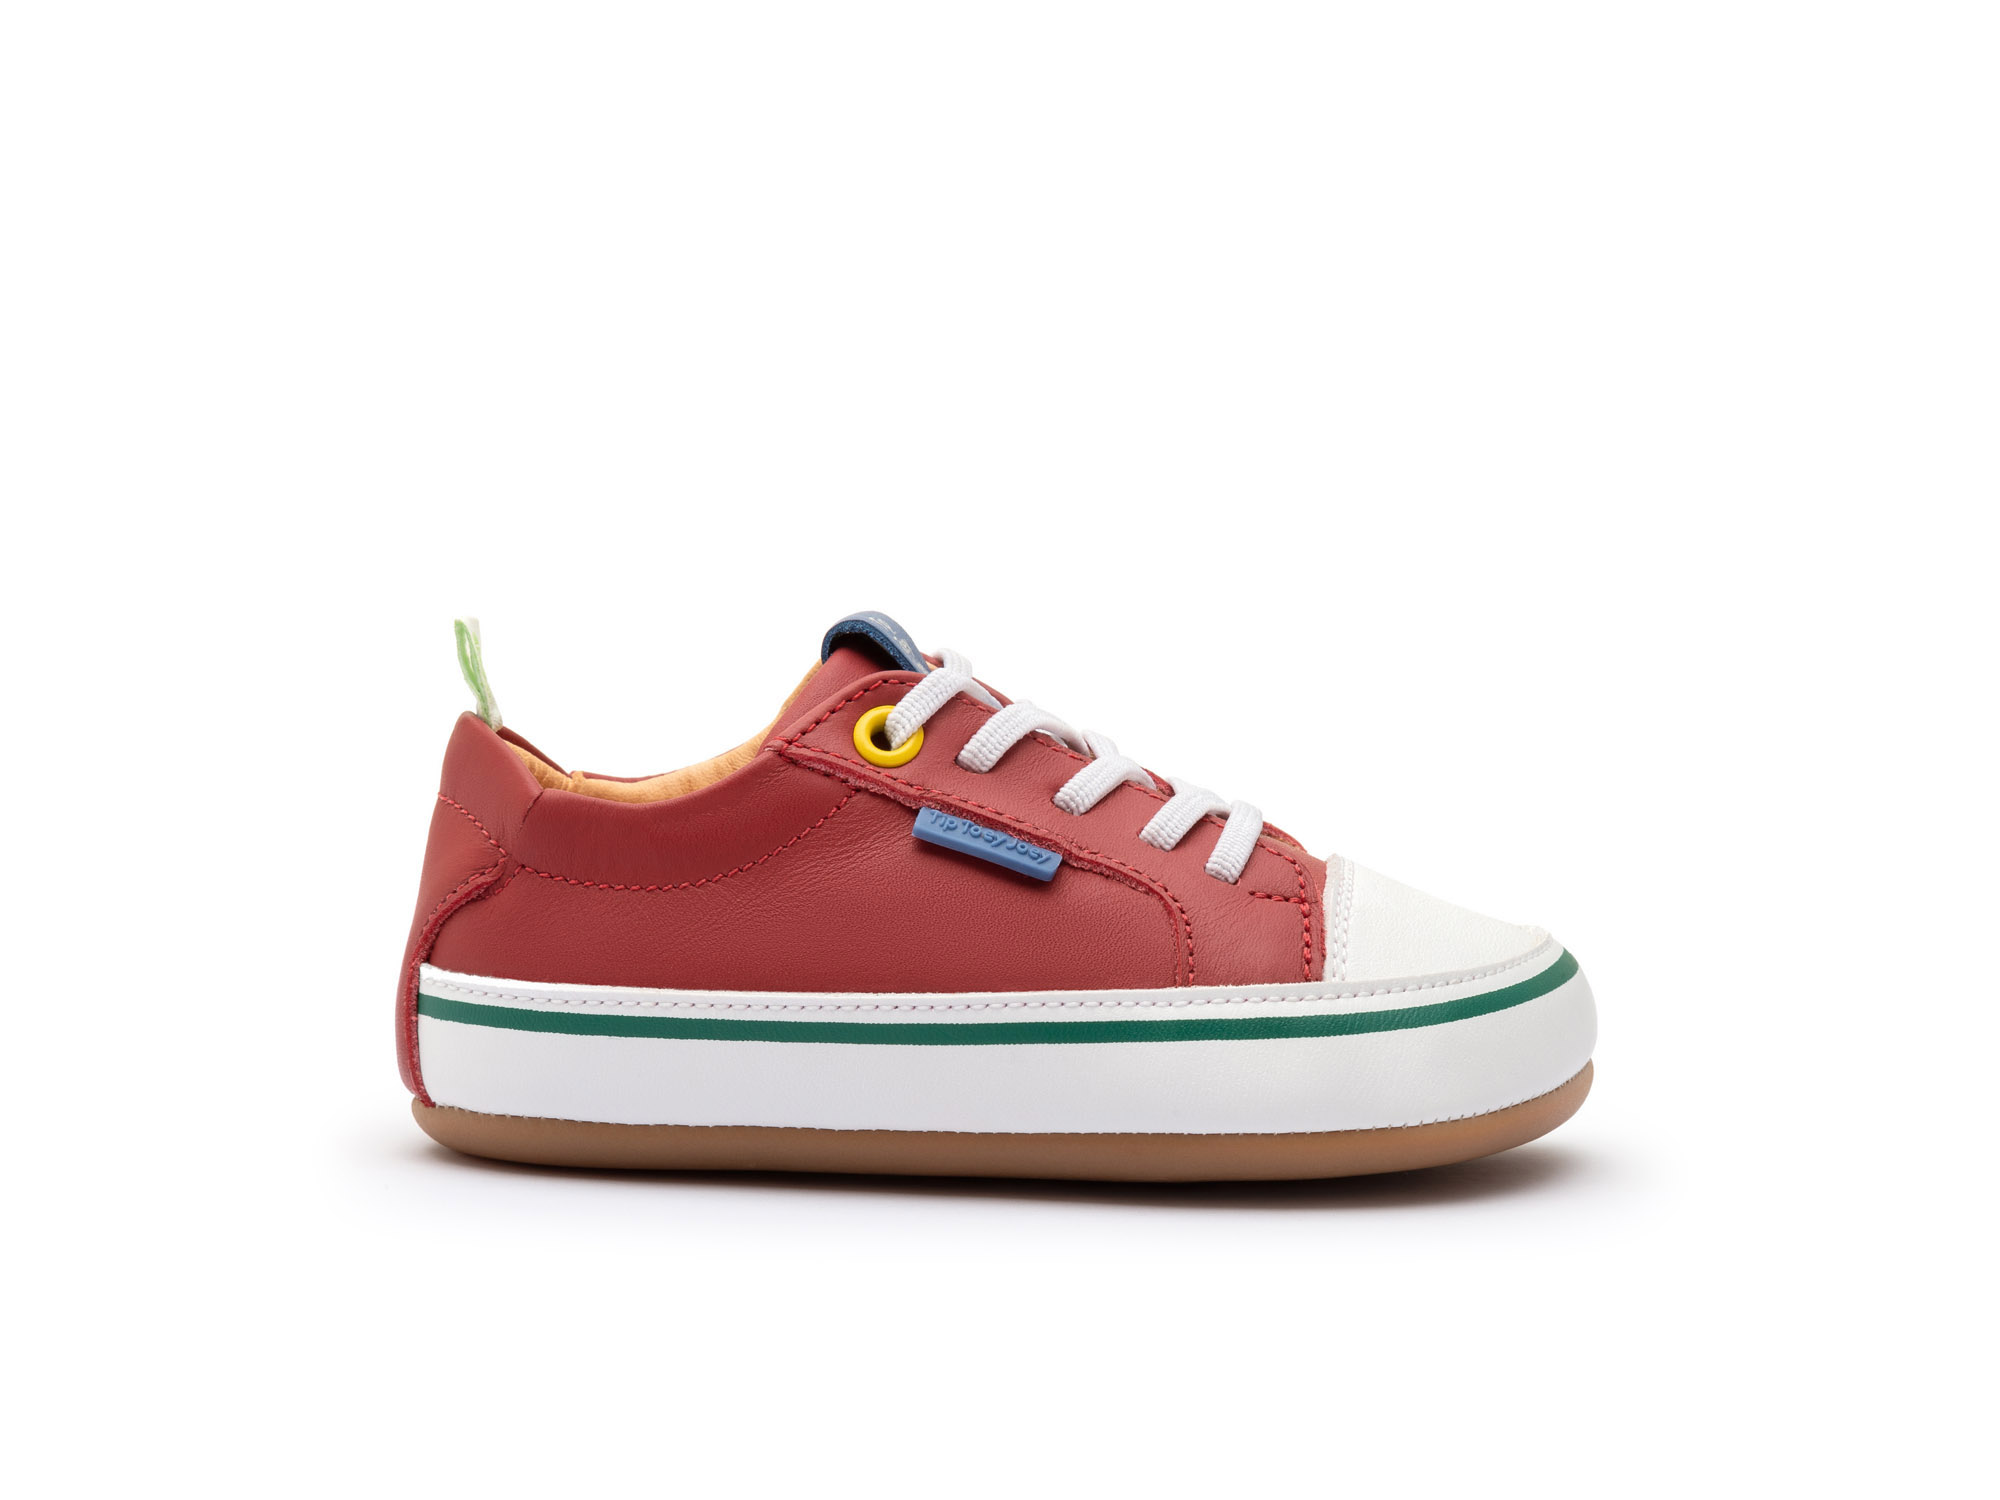 UP & GO Sneakers for Unissex Funky Colors | Tip Toey Joey - Australia - 4